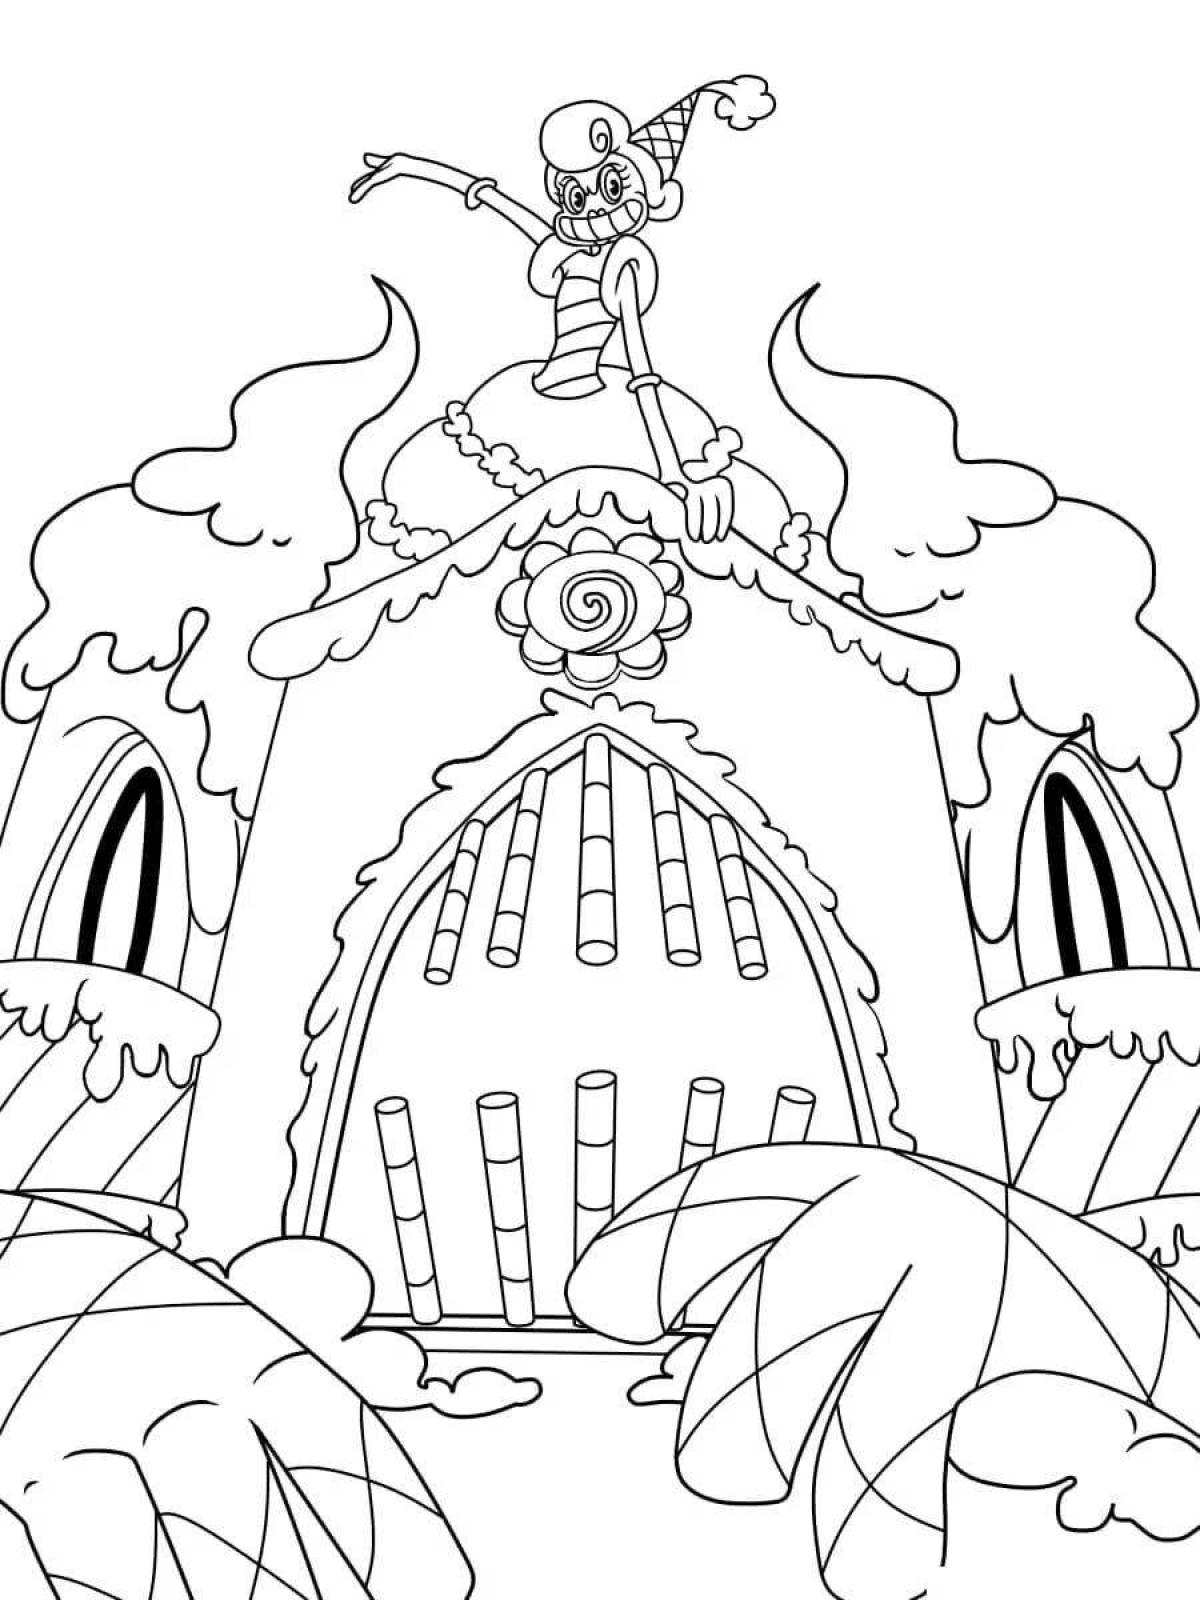 Adorable cuphead boss coloring page